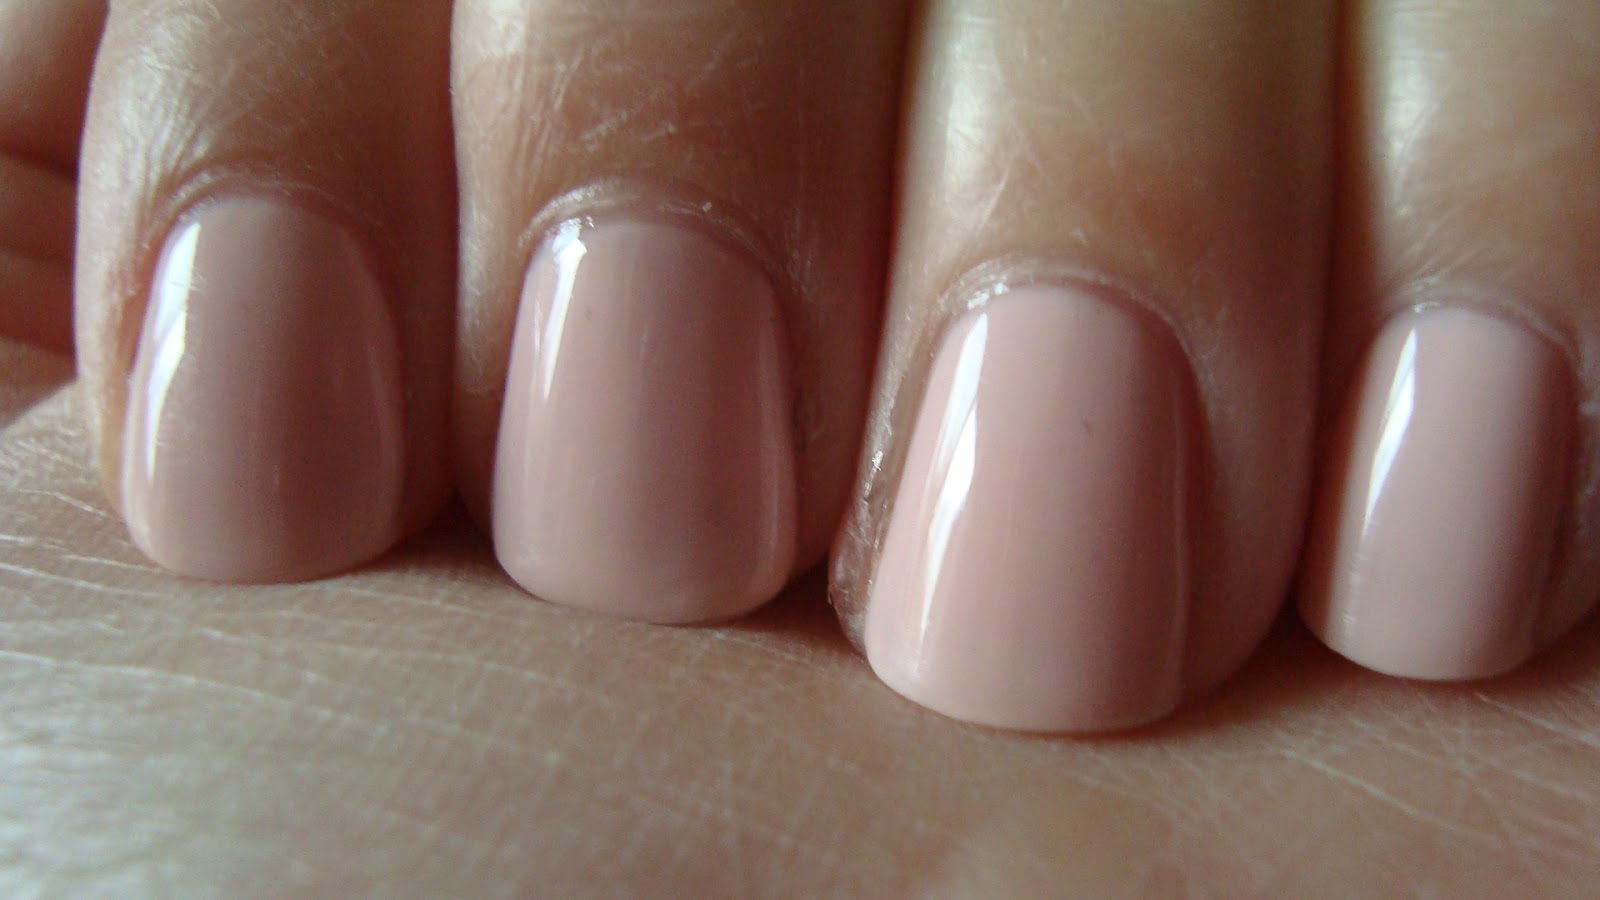 OPI Infinite Shine Nail Lacquer in Sweetheart - wide 2